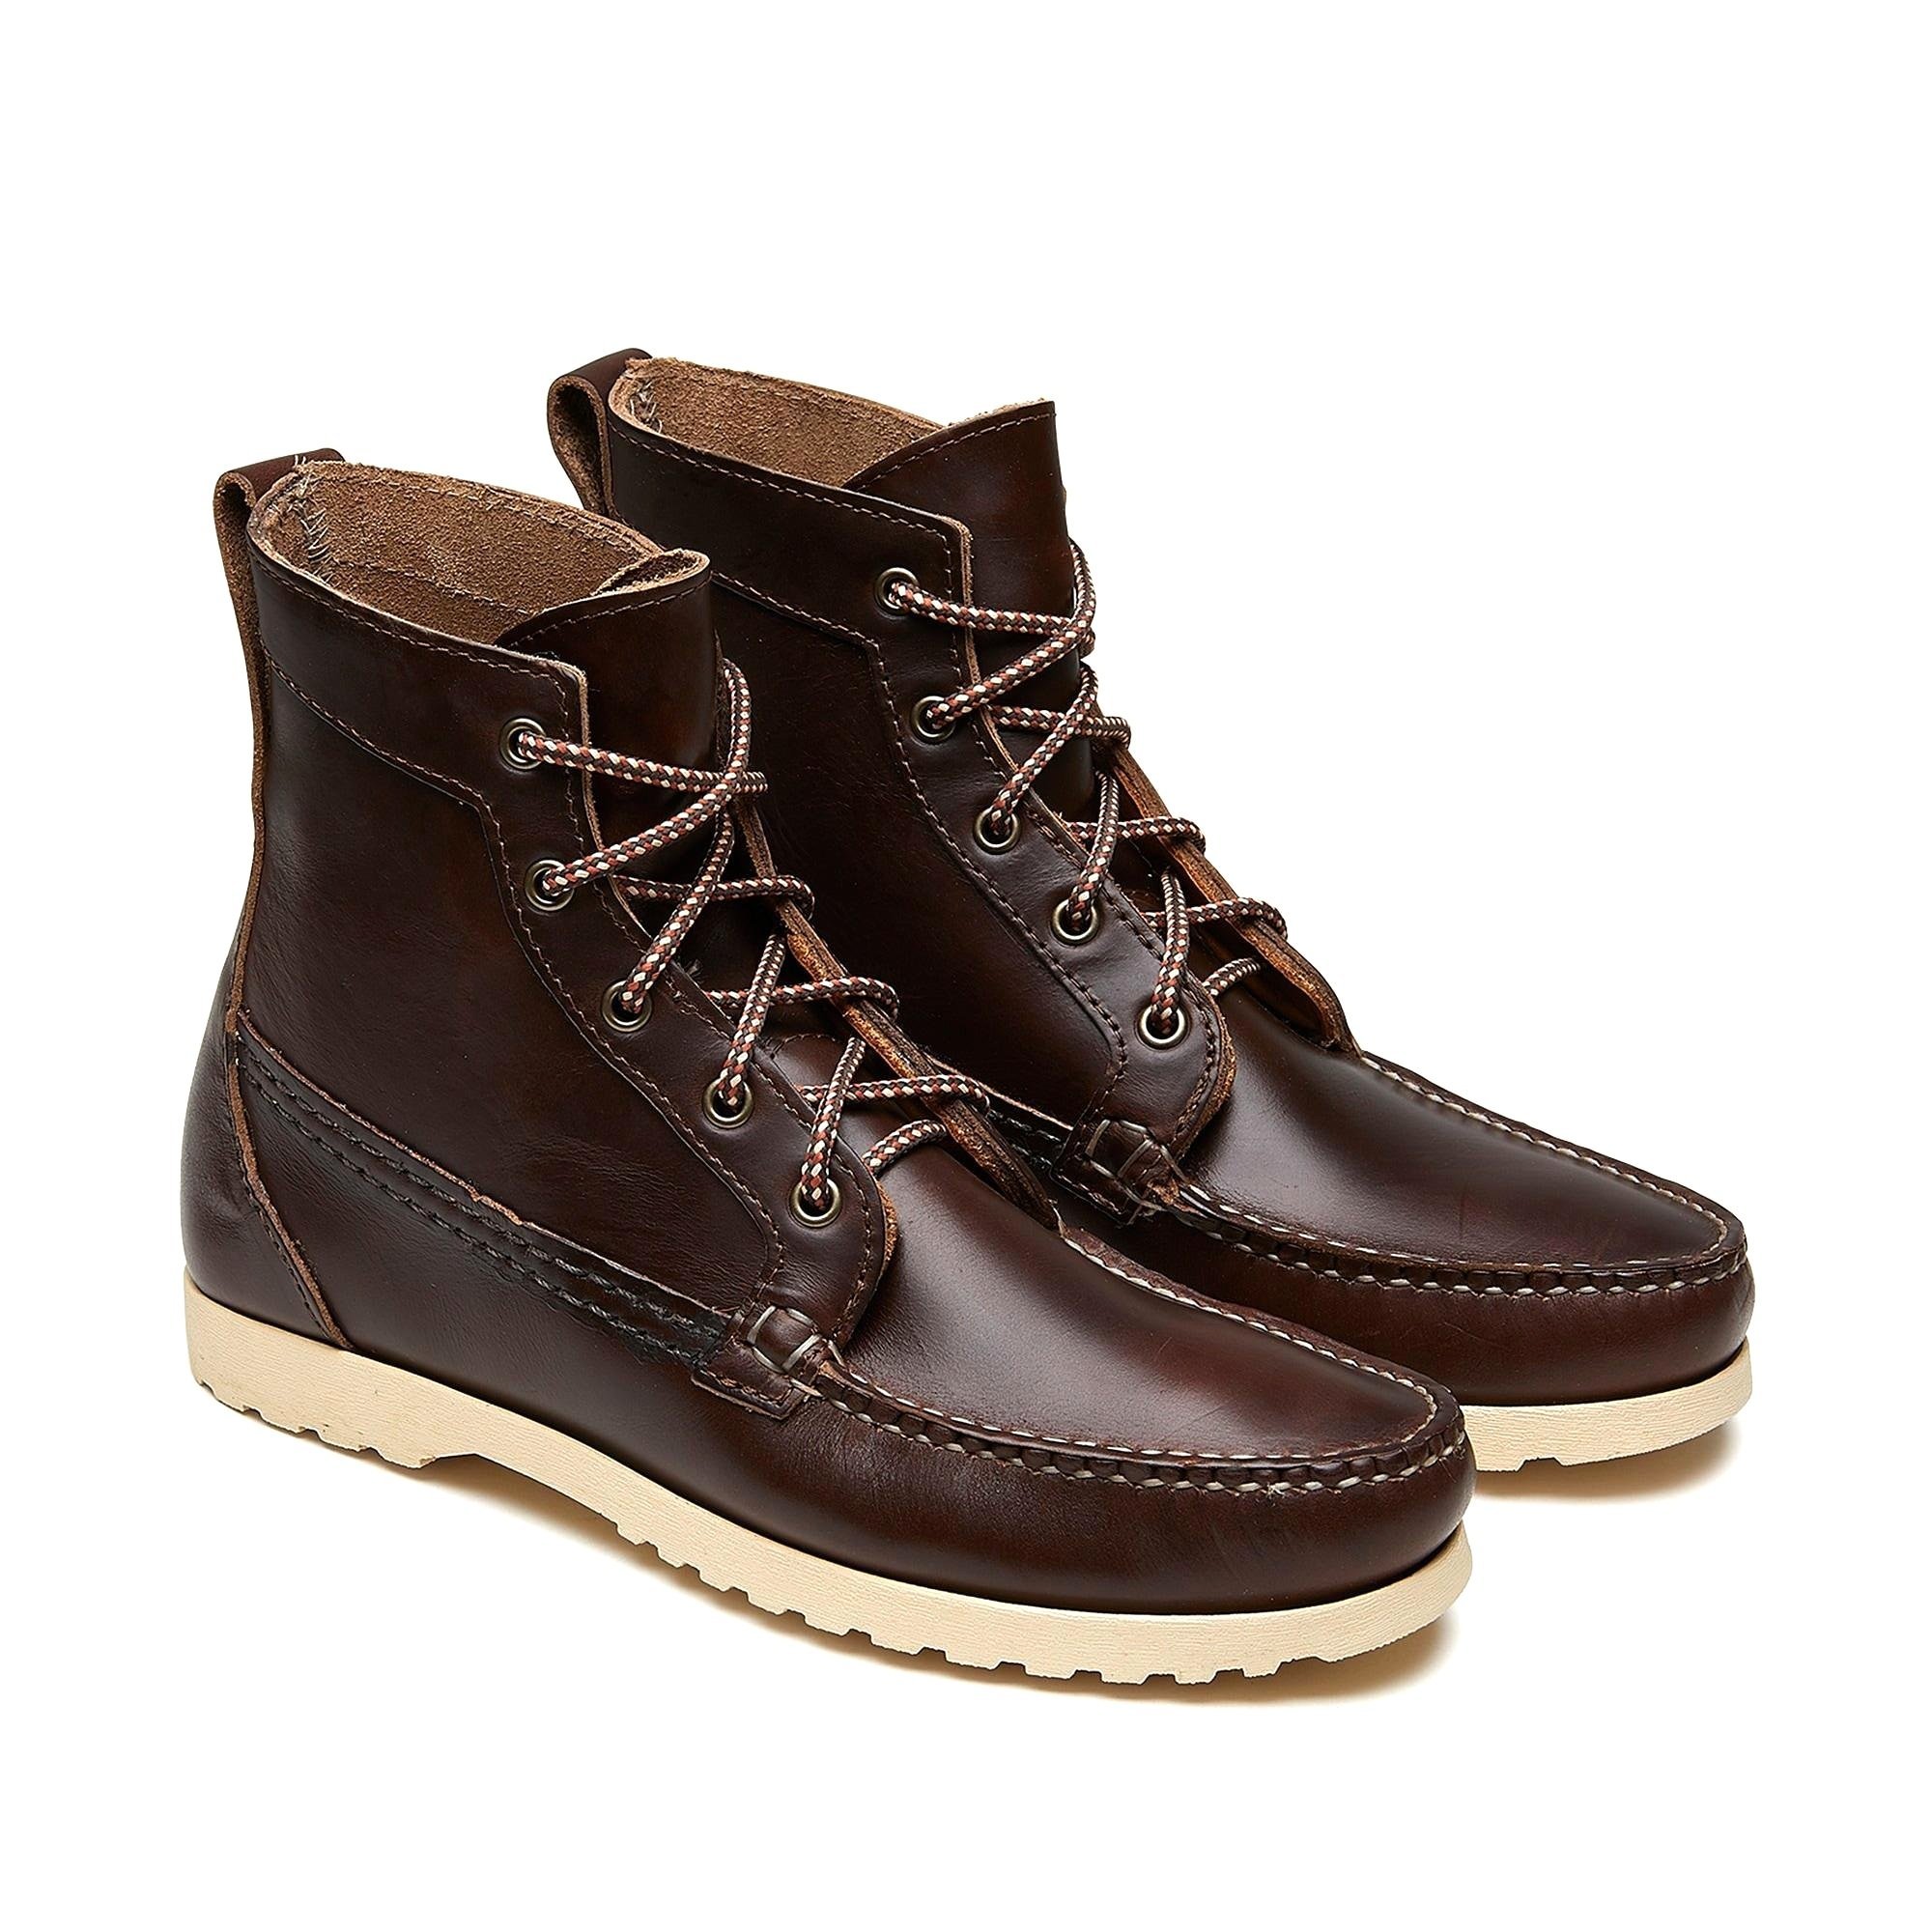 Quoddy® RL camp boots